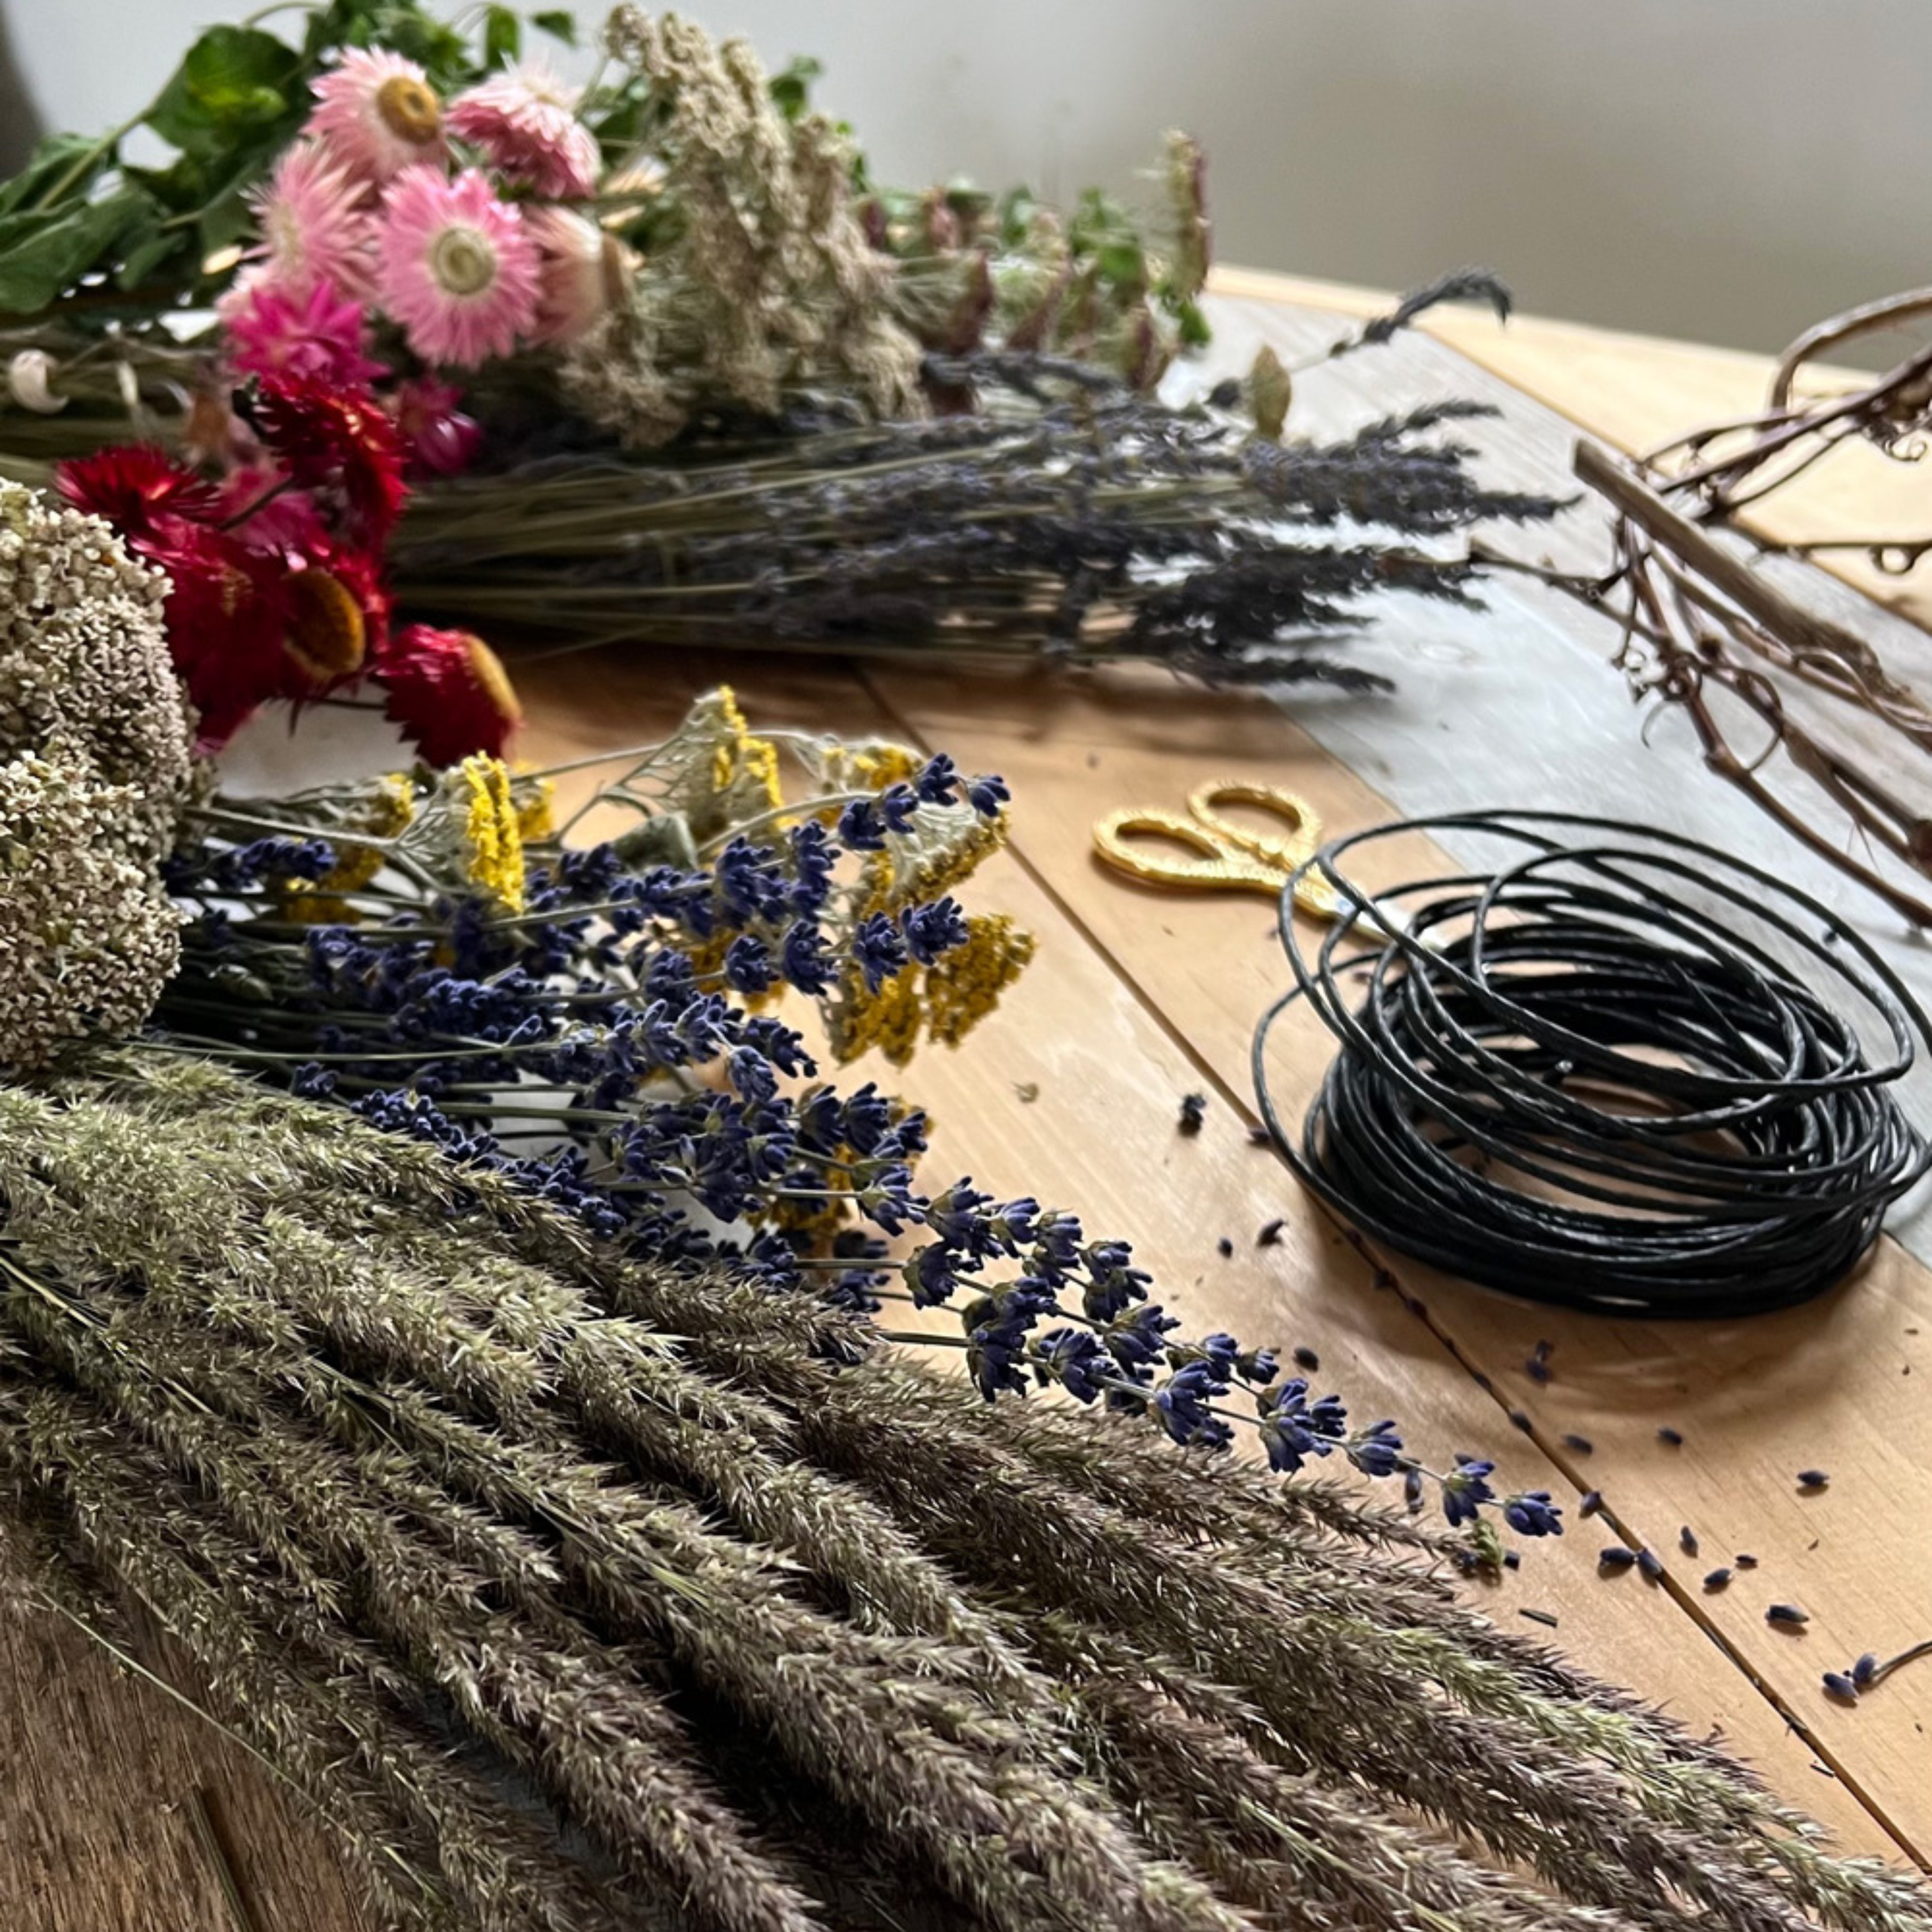 Dried Wreath Workshop at Tullamore Lavender Co. - September 24th